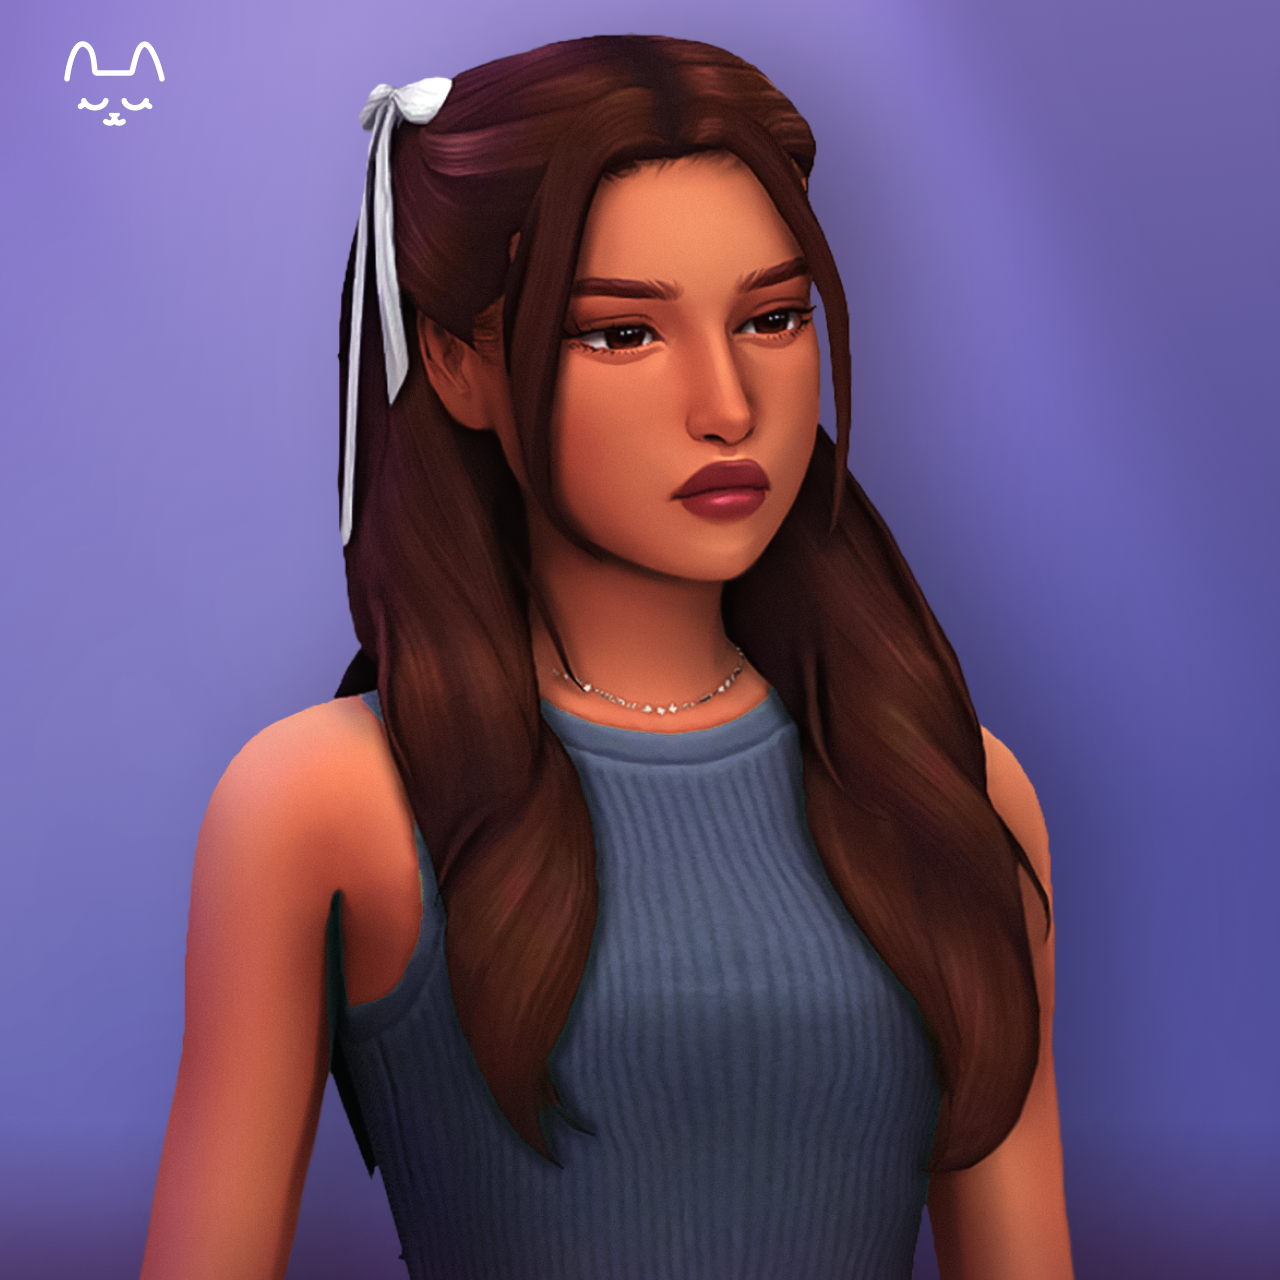 Selena Hairstyle project avatar